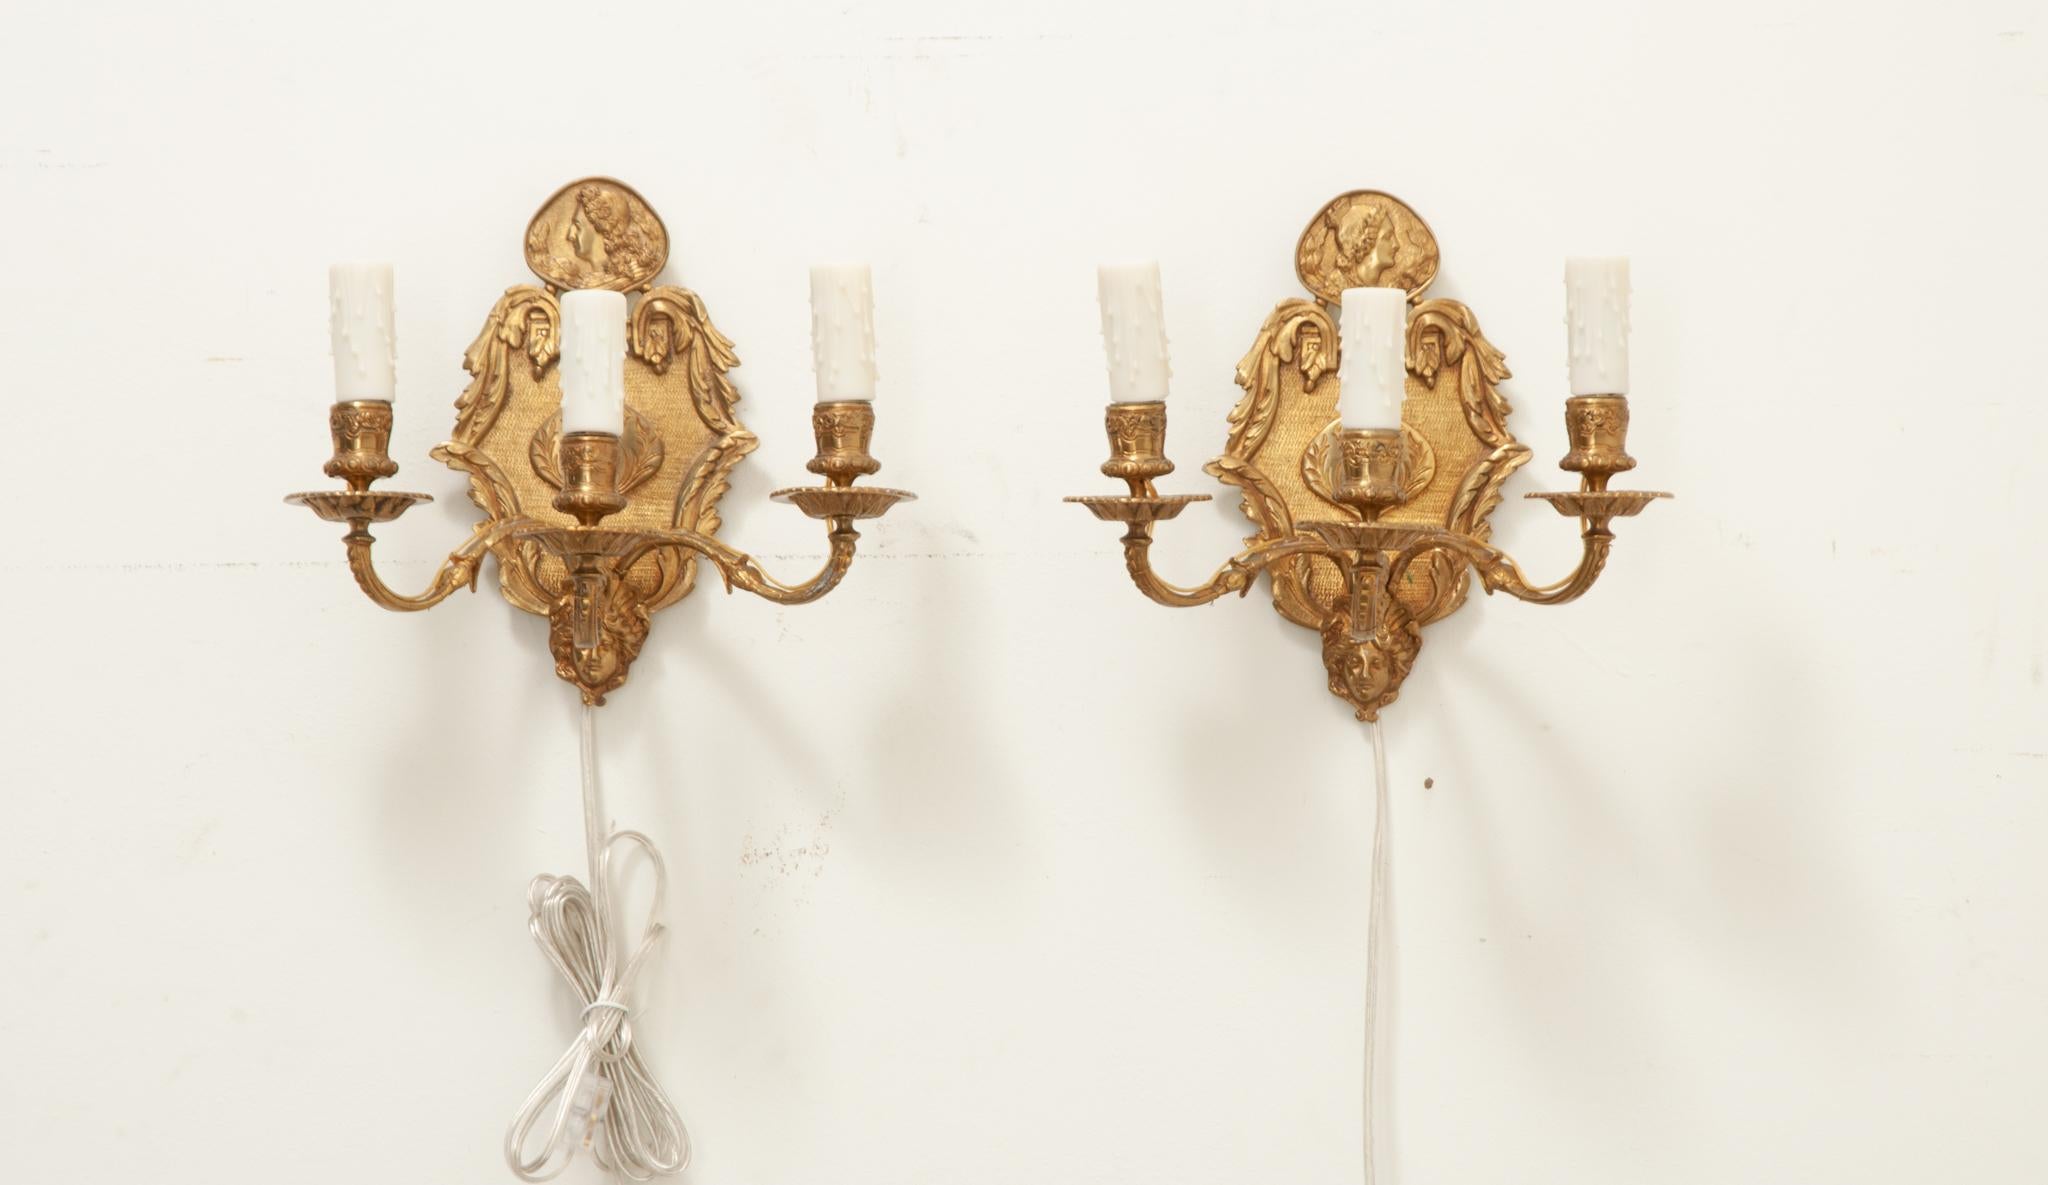 An elegant pair of French brass wall sconces. This pair of petite sconces has three brass arms each with faux candle covers. Classic French motifs are throughout the fixture, including a crest of fleur de lis topped with a crown and pendants